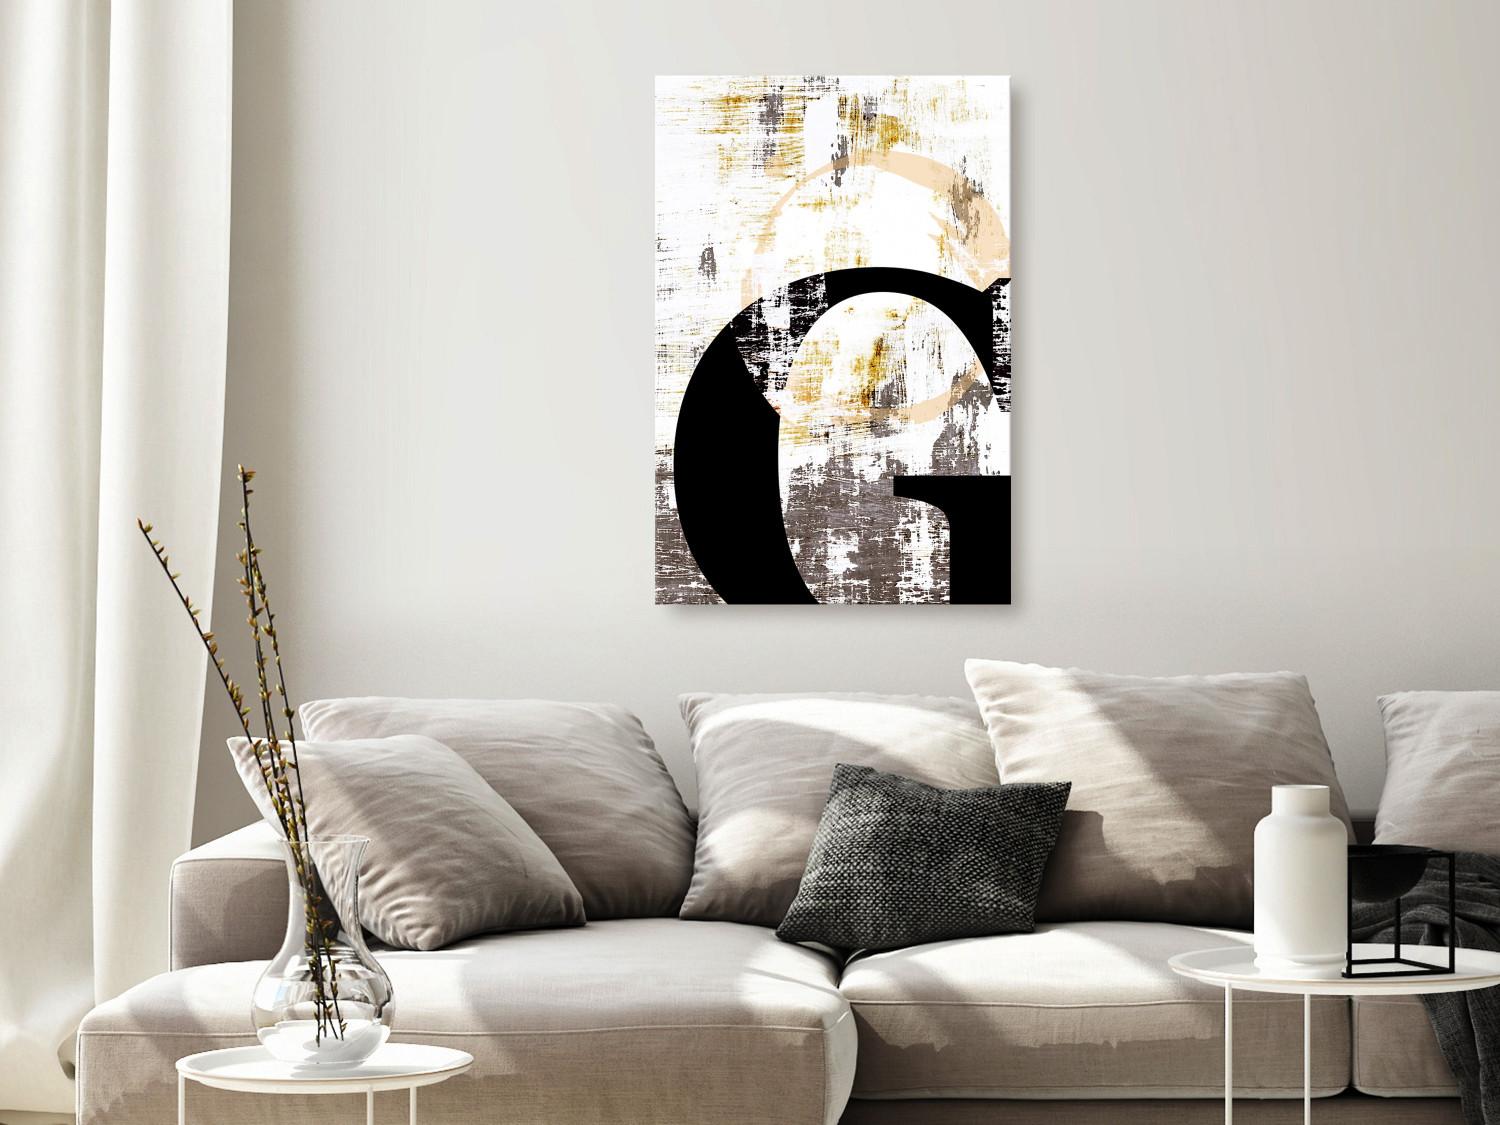 Canvas Black, capital letter G - abstraction with grey and white elements